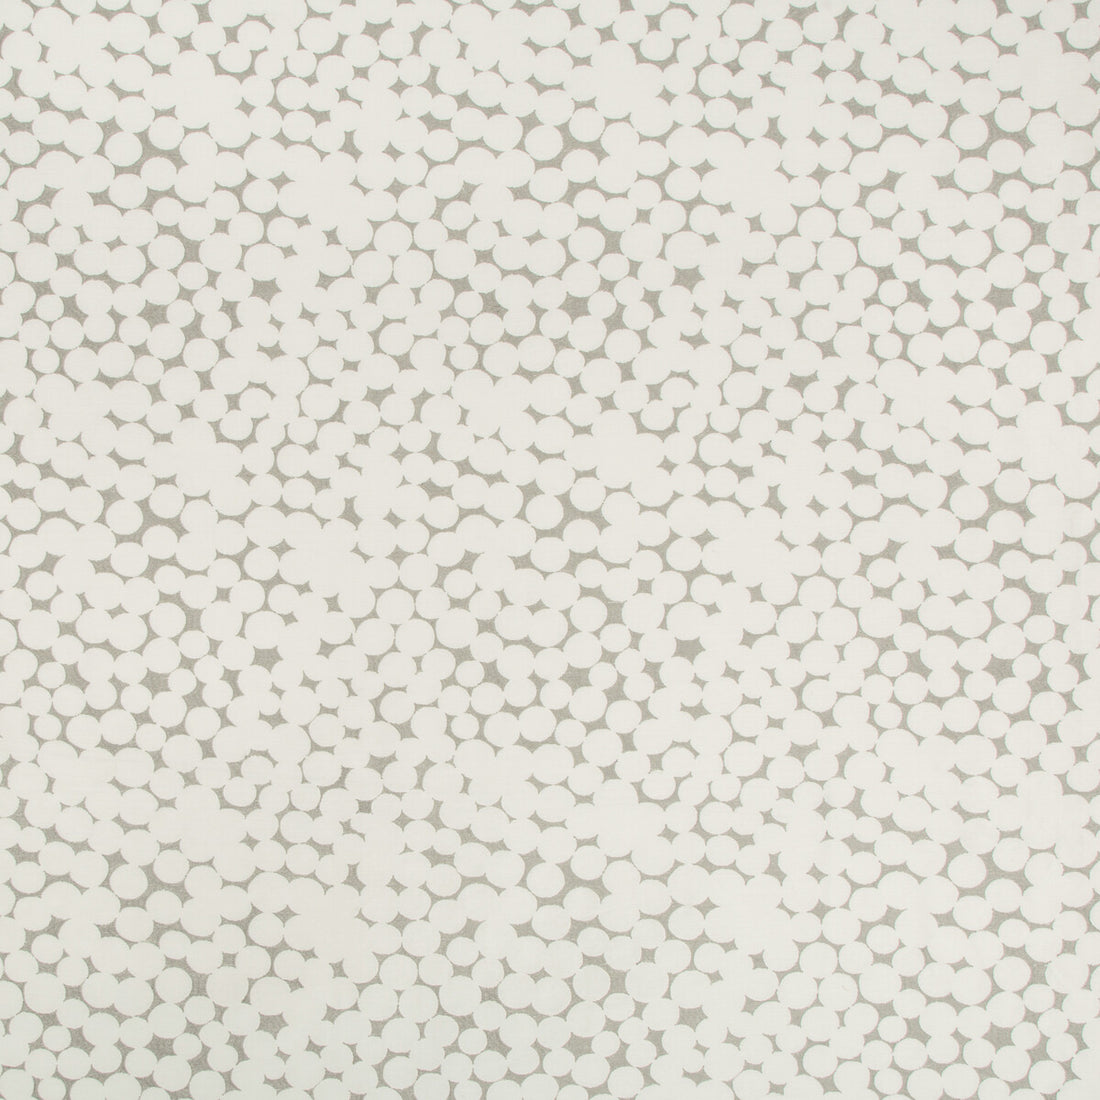 Olivos fabric in limestone color - pattern 4474.23.0 - by Kravet Couture in the Sue Firestone Malibu collection